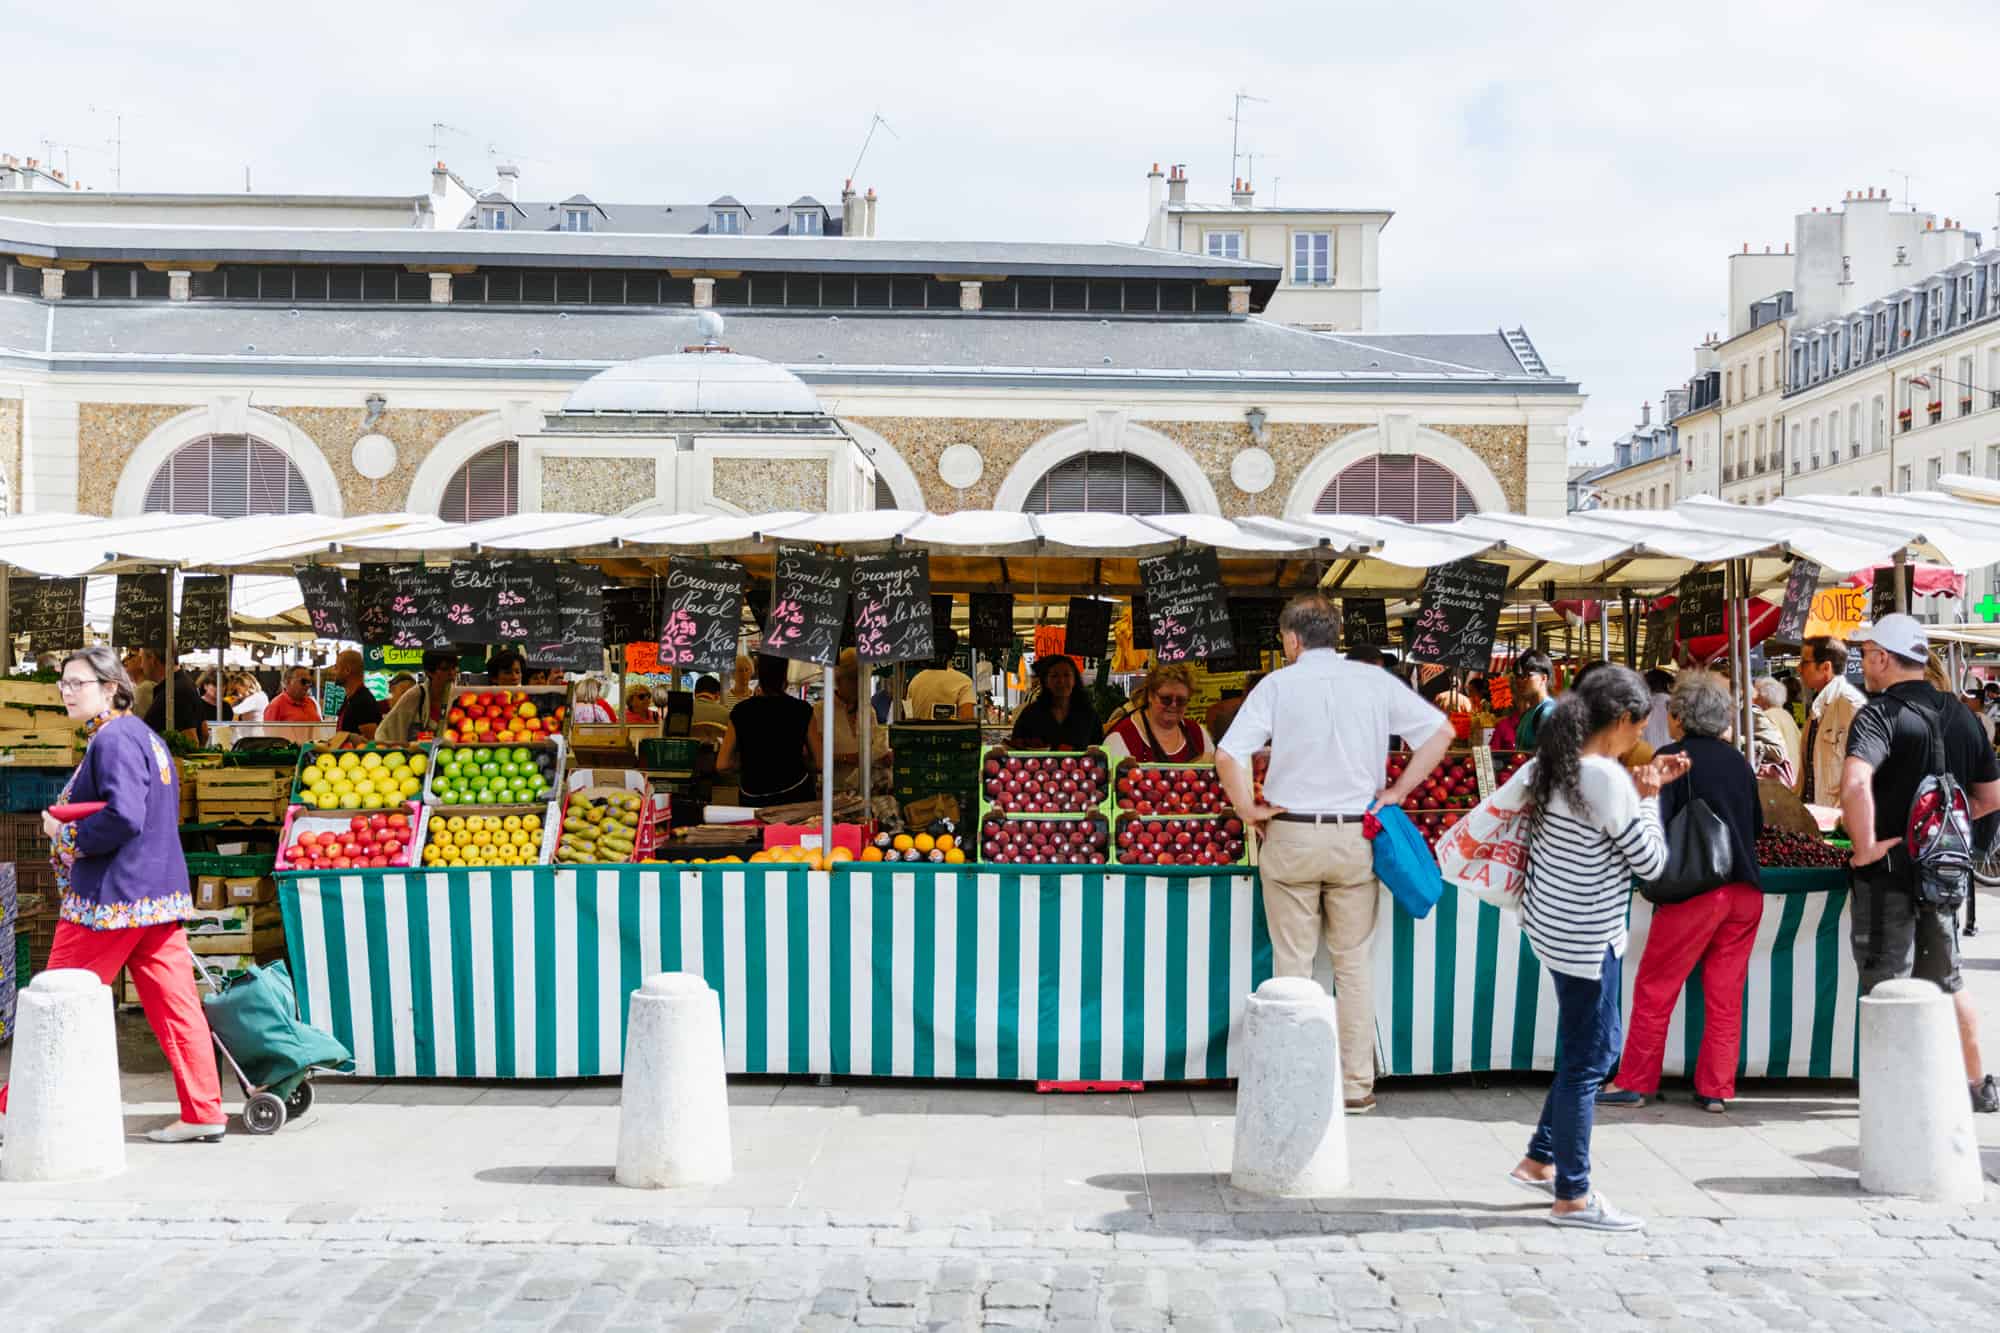 A fruit & vegetable stand at the open-air market in Versailles, France.